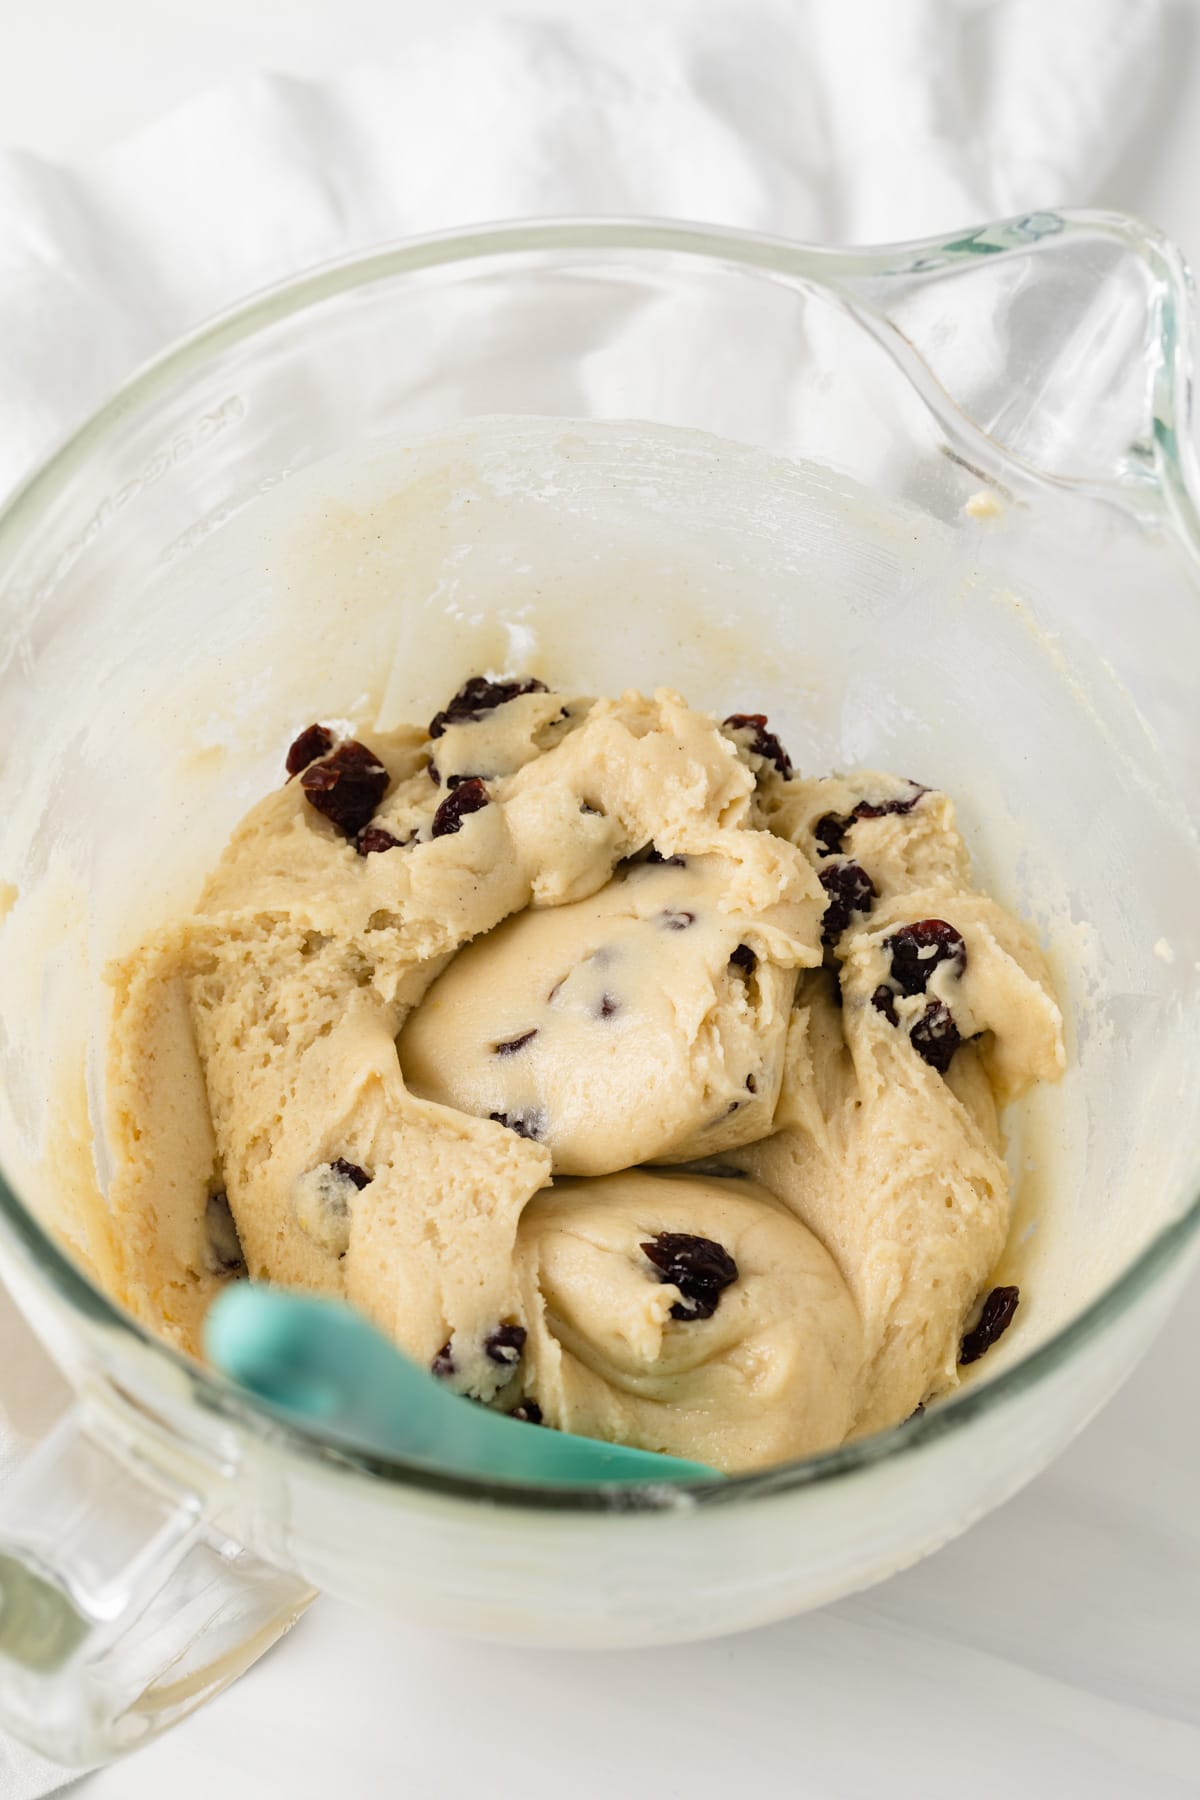 cherry almond cookie dough in glass bowl with teal spatula